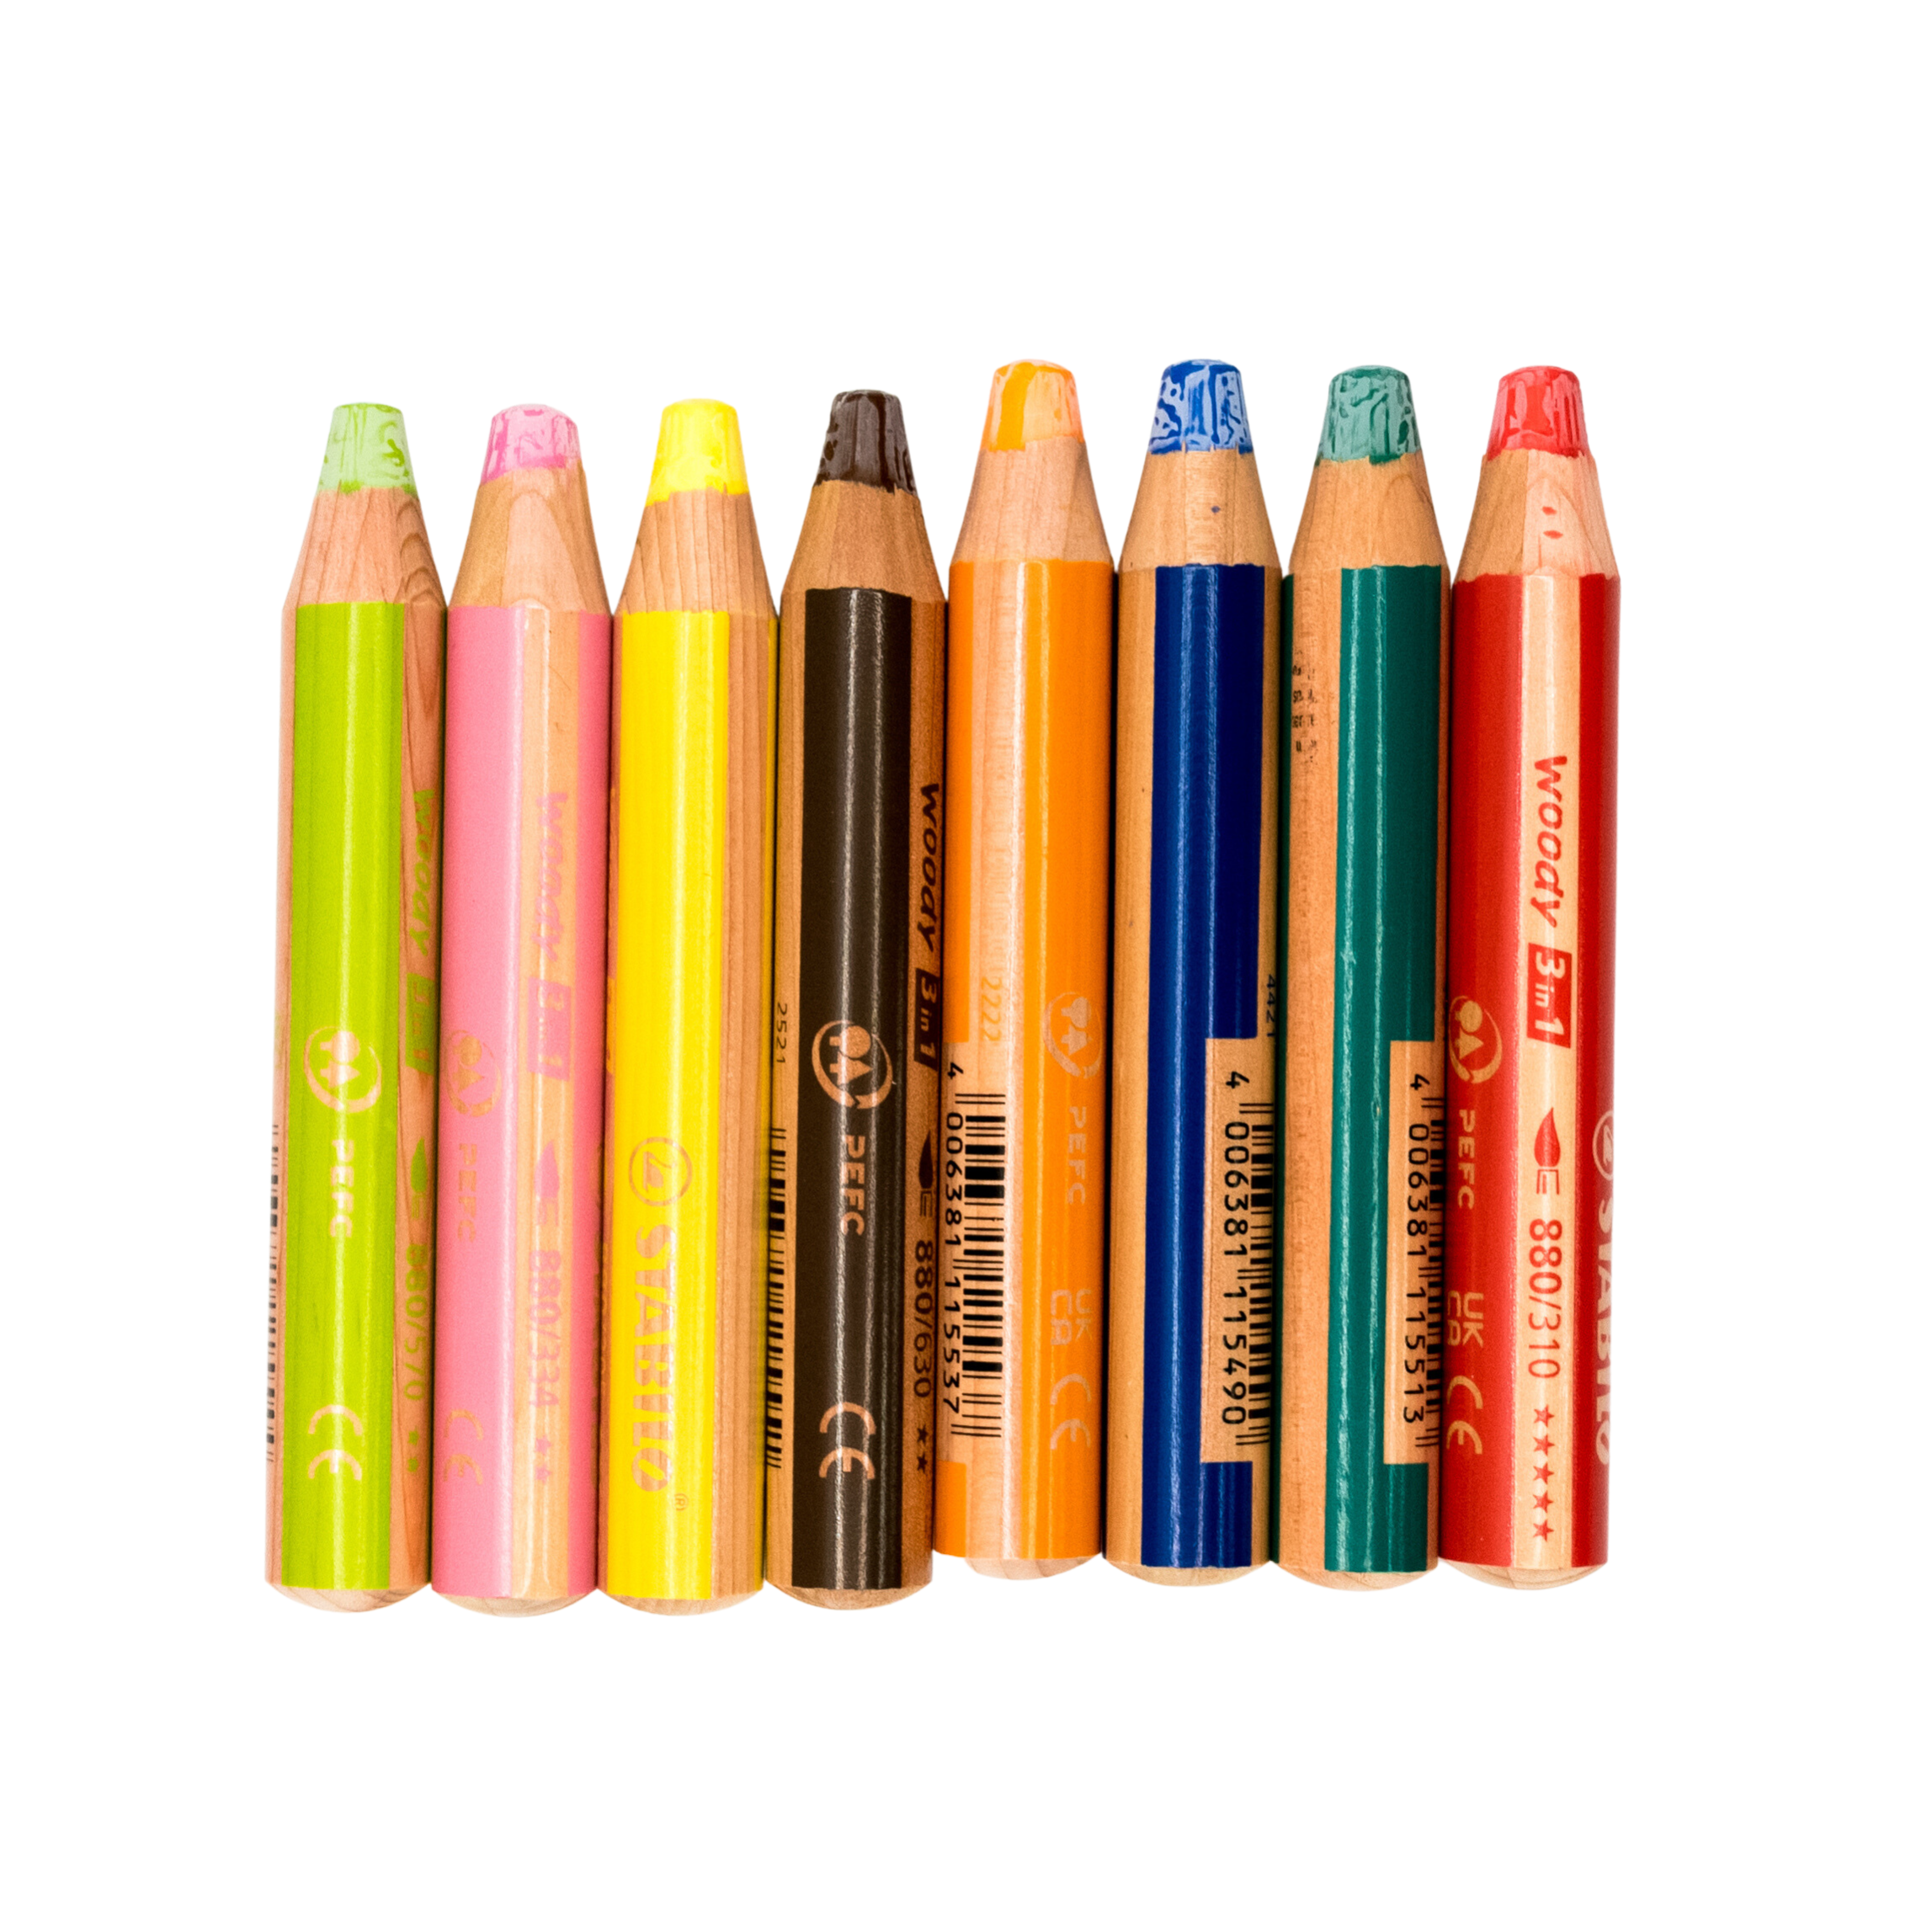 STABILO Crayon couleur woody 3in1 880/48-4 Pastell, display 48 pcs